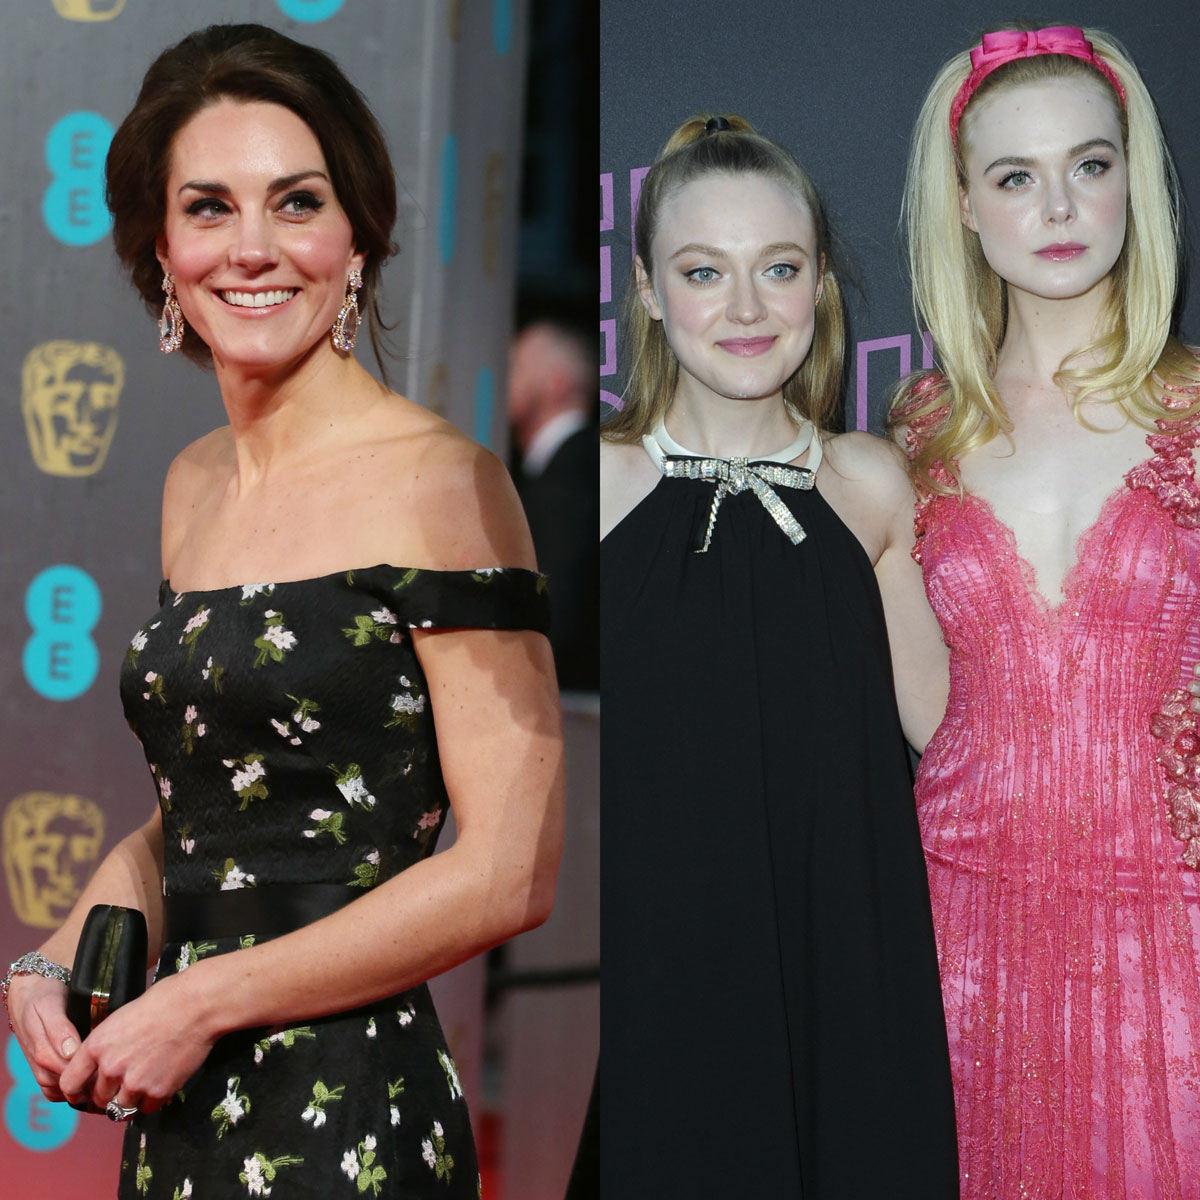 Kate Middleton and Dakota and Elle Fanning are related